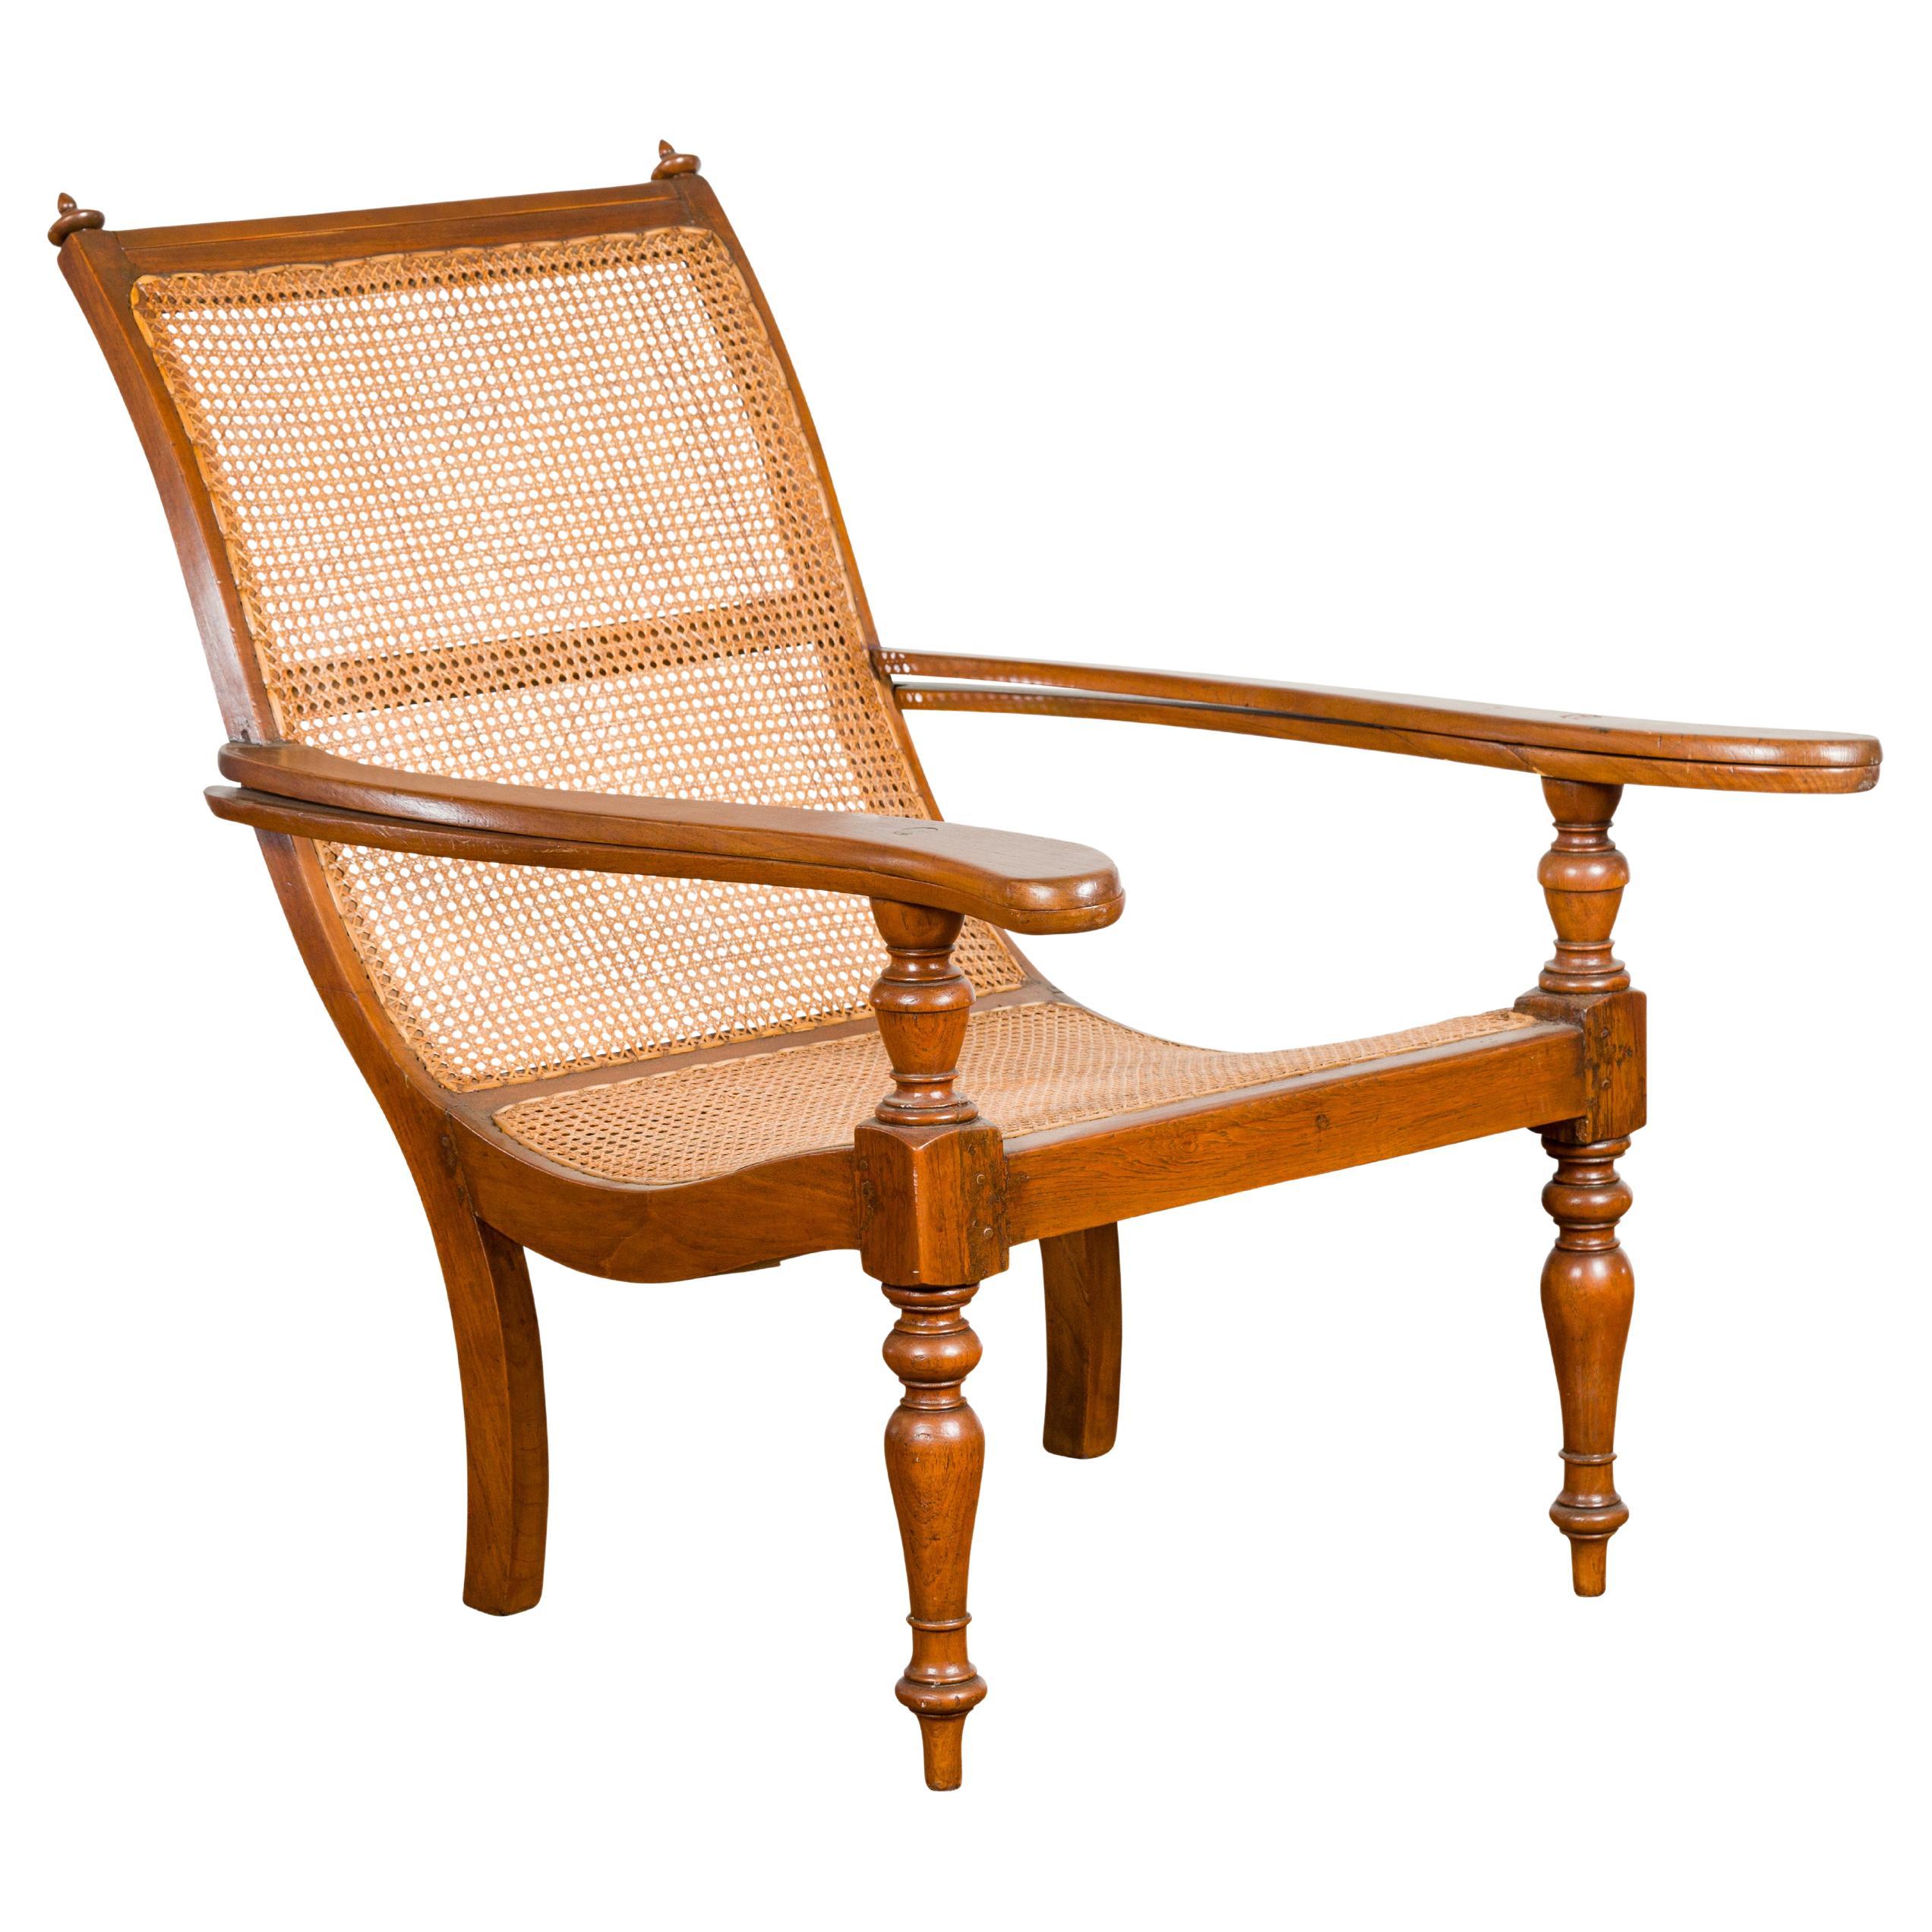 Dutch Colonial Period Wood and Rattan Lounge Chair with Extending Arms For Sale